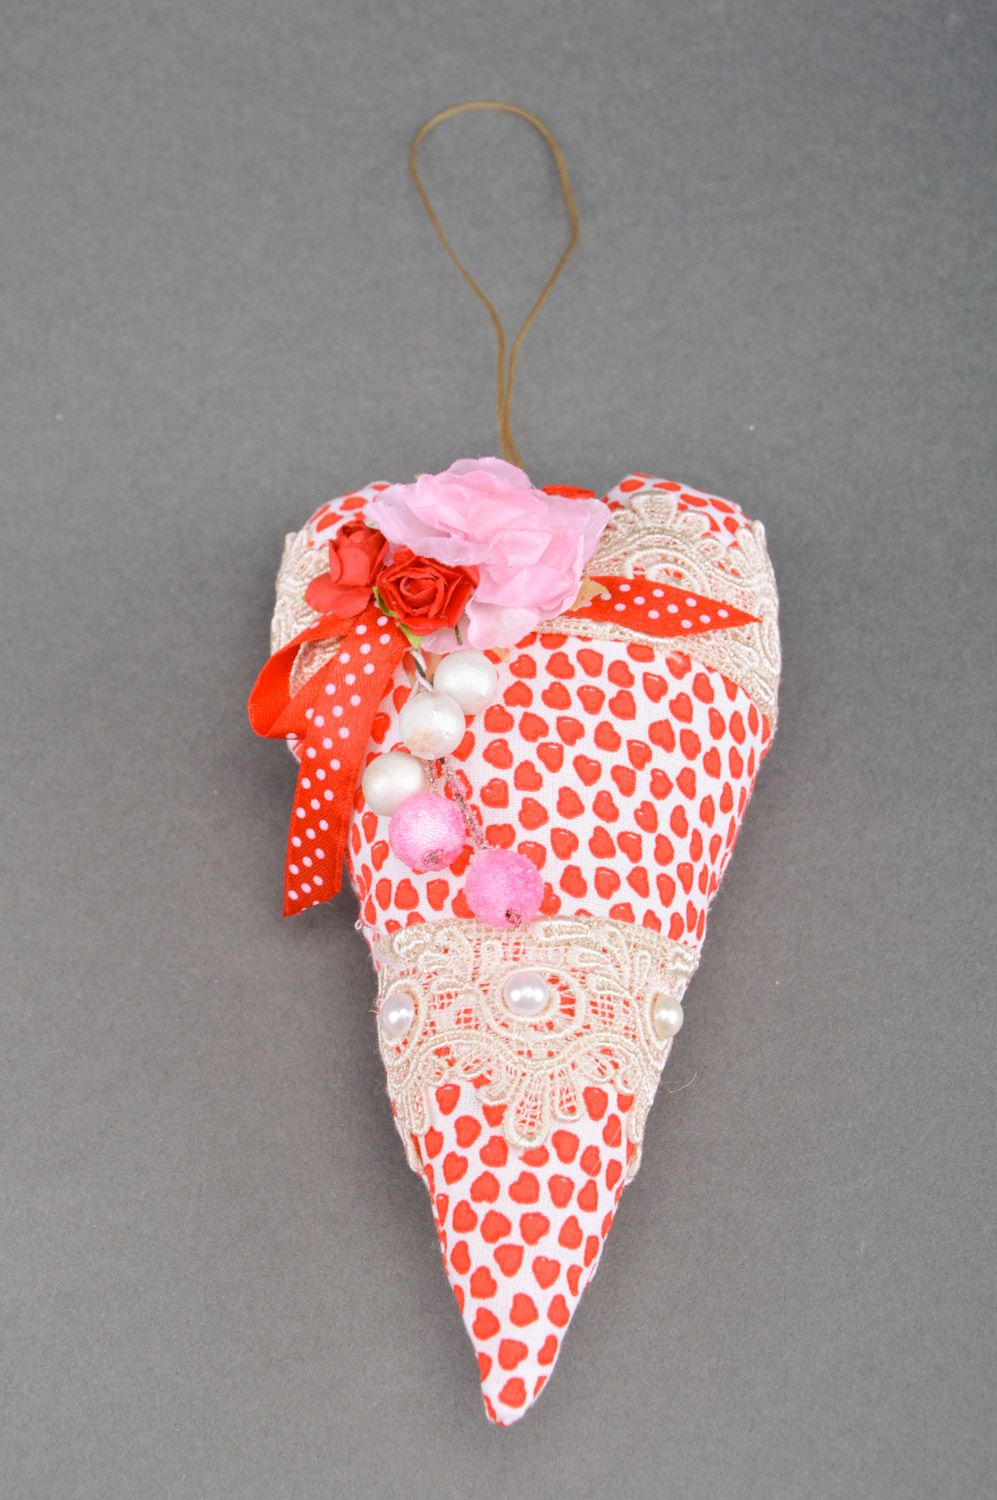 Handmade heart-shaped decorative wall hanging decoration sewn of cotton with lace photo 3